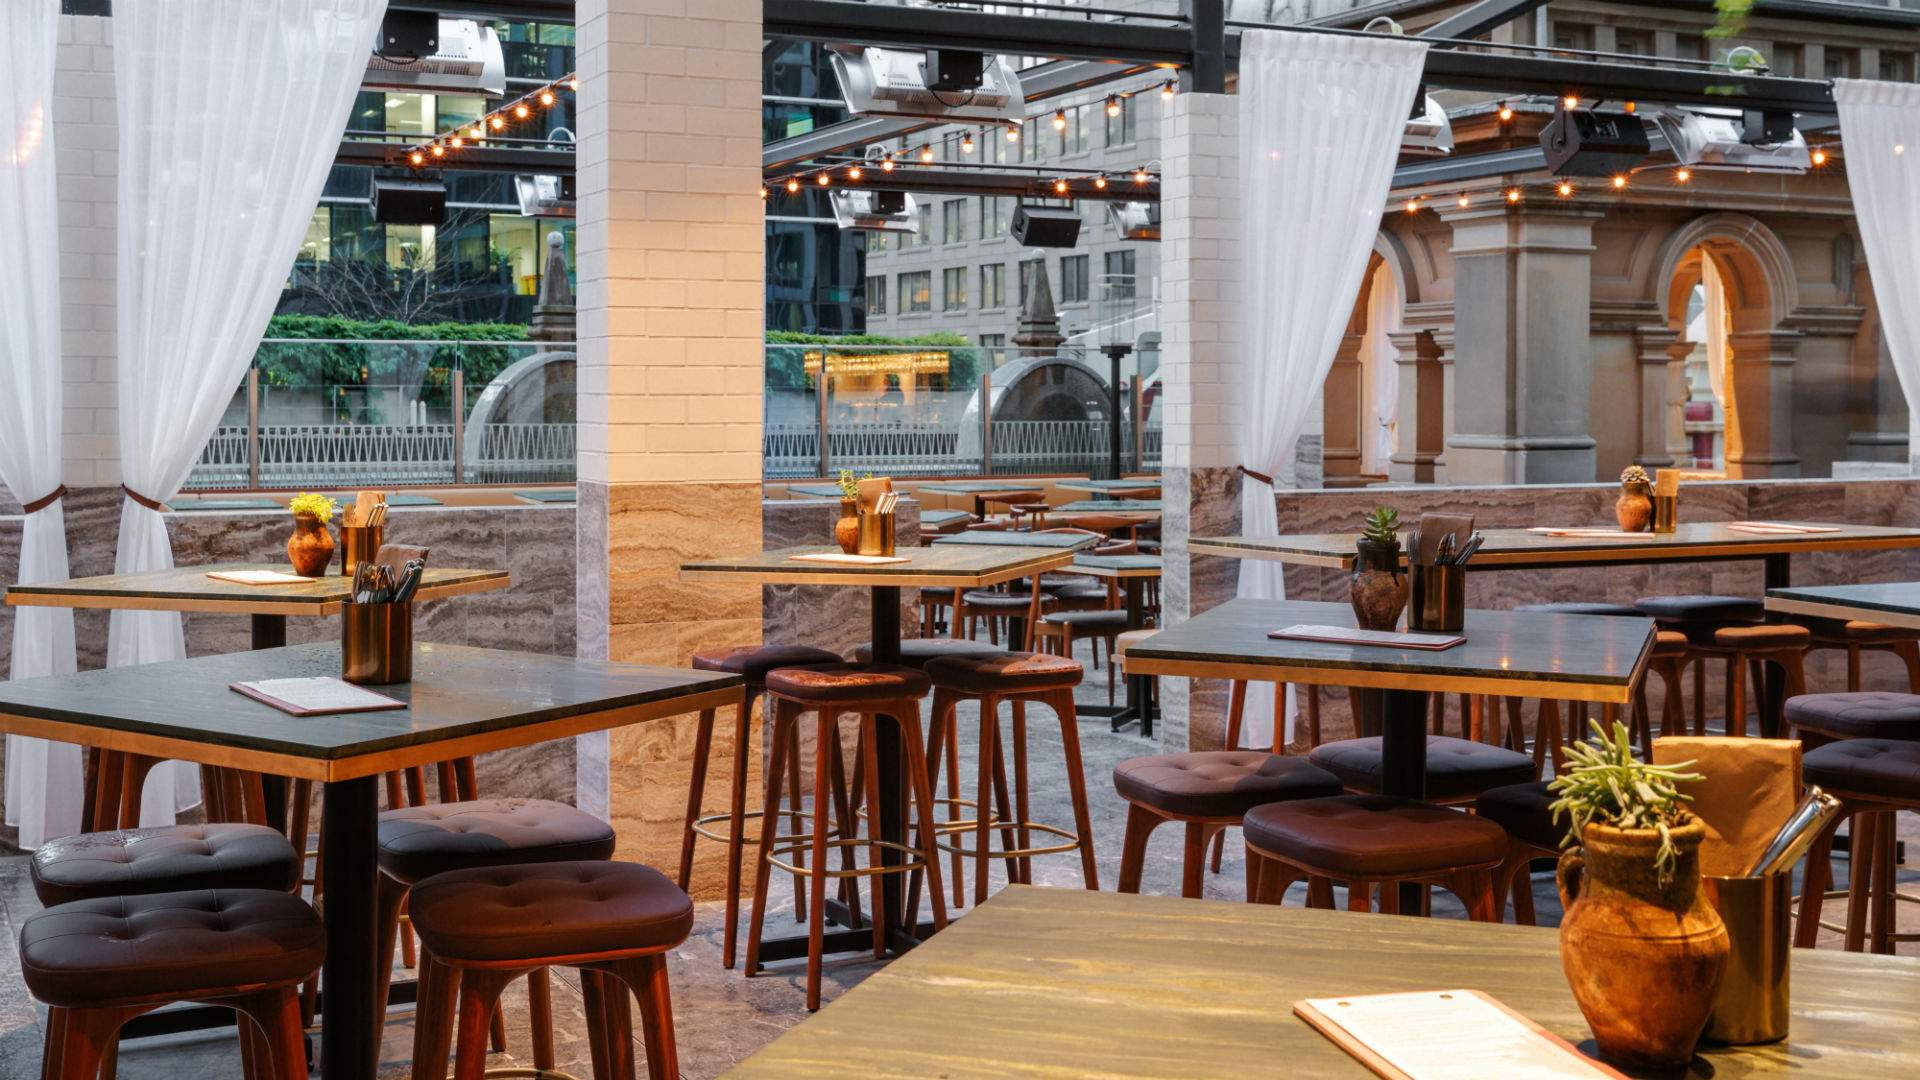 Babylon Is Sydney's New Sprawling Middle Eastern Bar and Restaurant Located on a CBD Rooftop